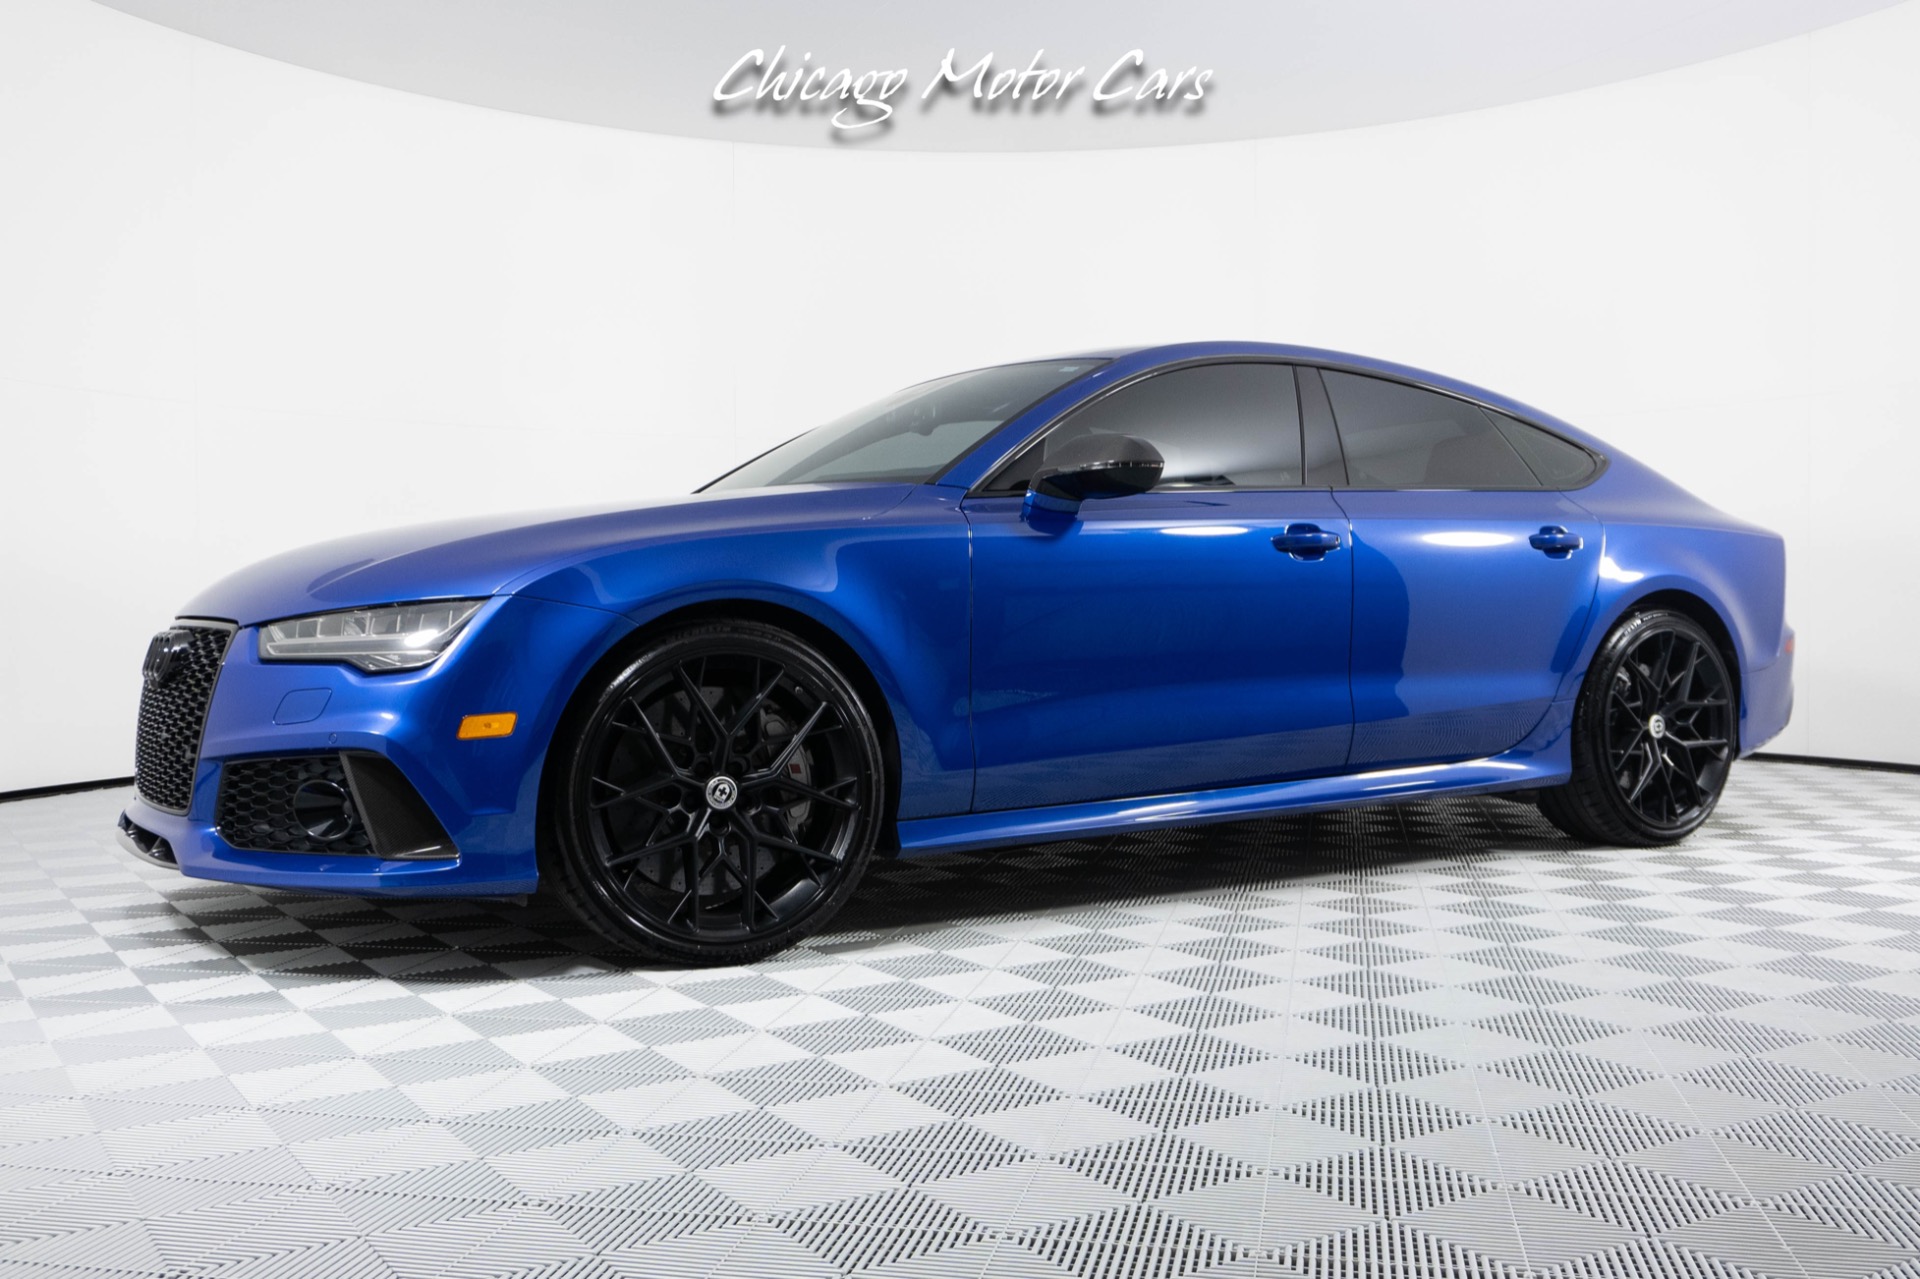 Used-2017-Audi-RS7-40T-Quattro-PERFORMANCE-HRE-WHEELS-FULLY-TUNED-TONS-OF-CARBON-FIBER